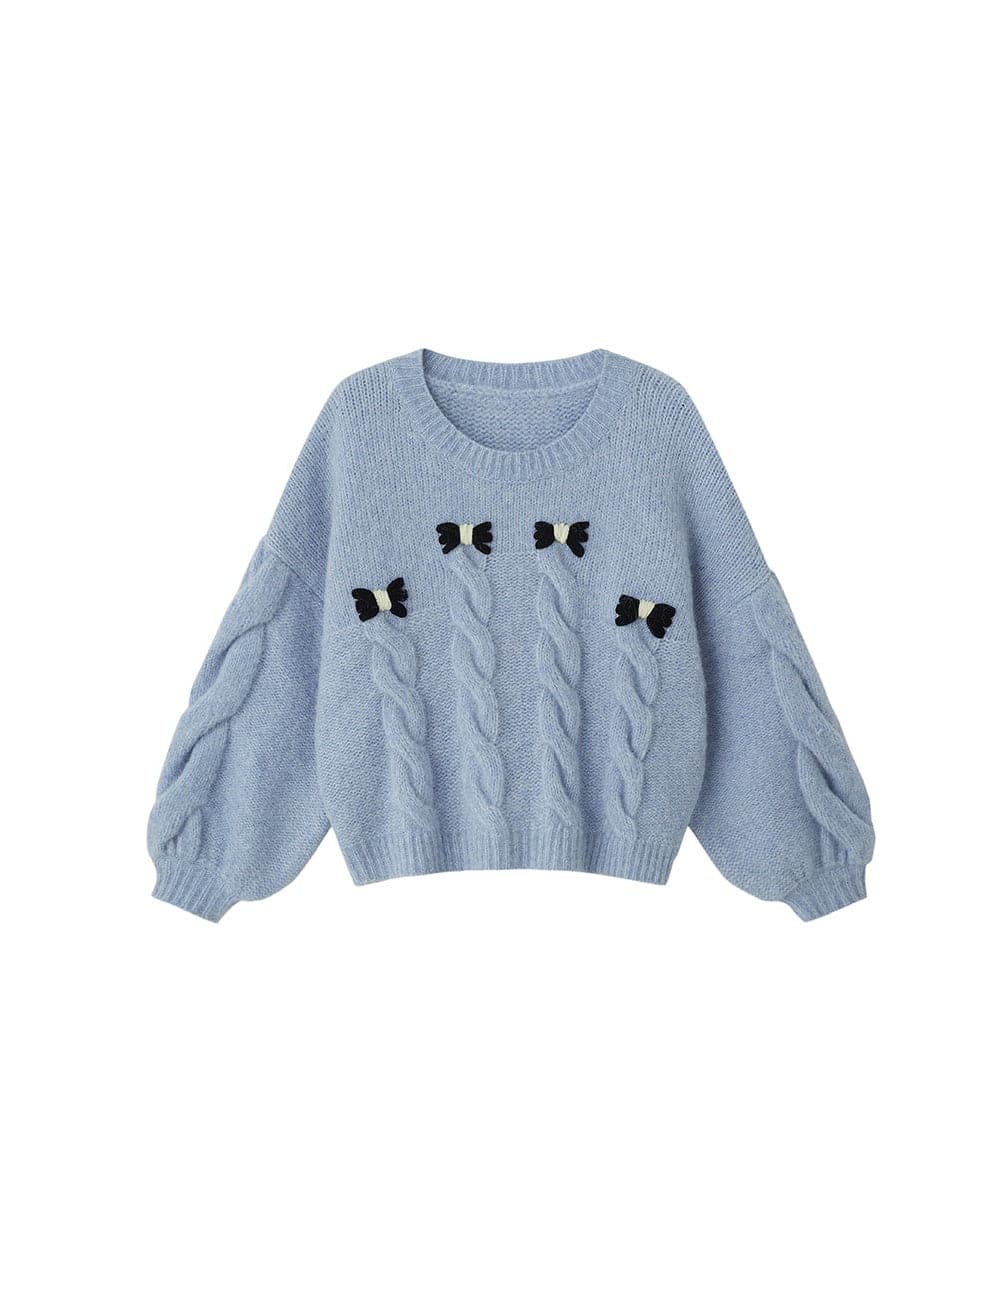 Cable Bow Knit Sweater - chiclara